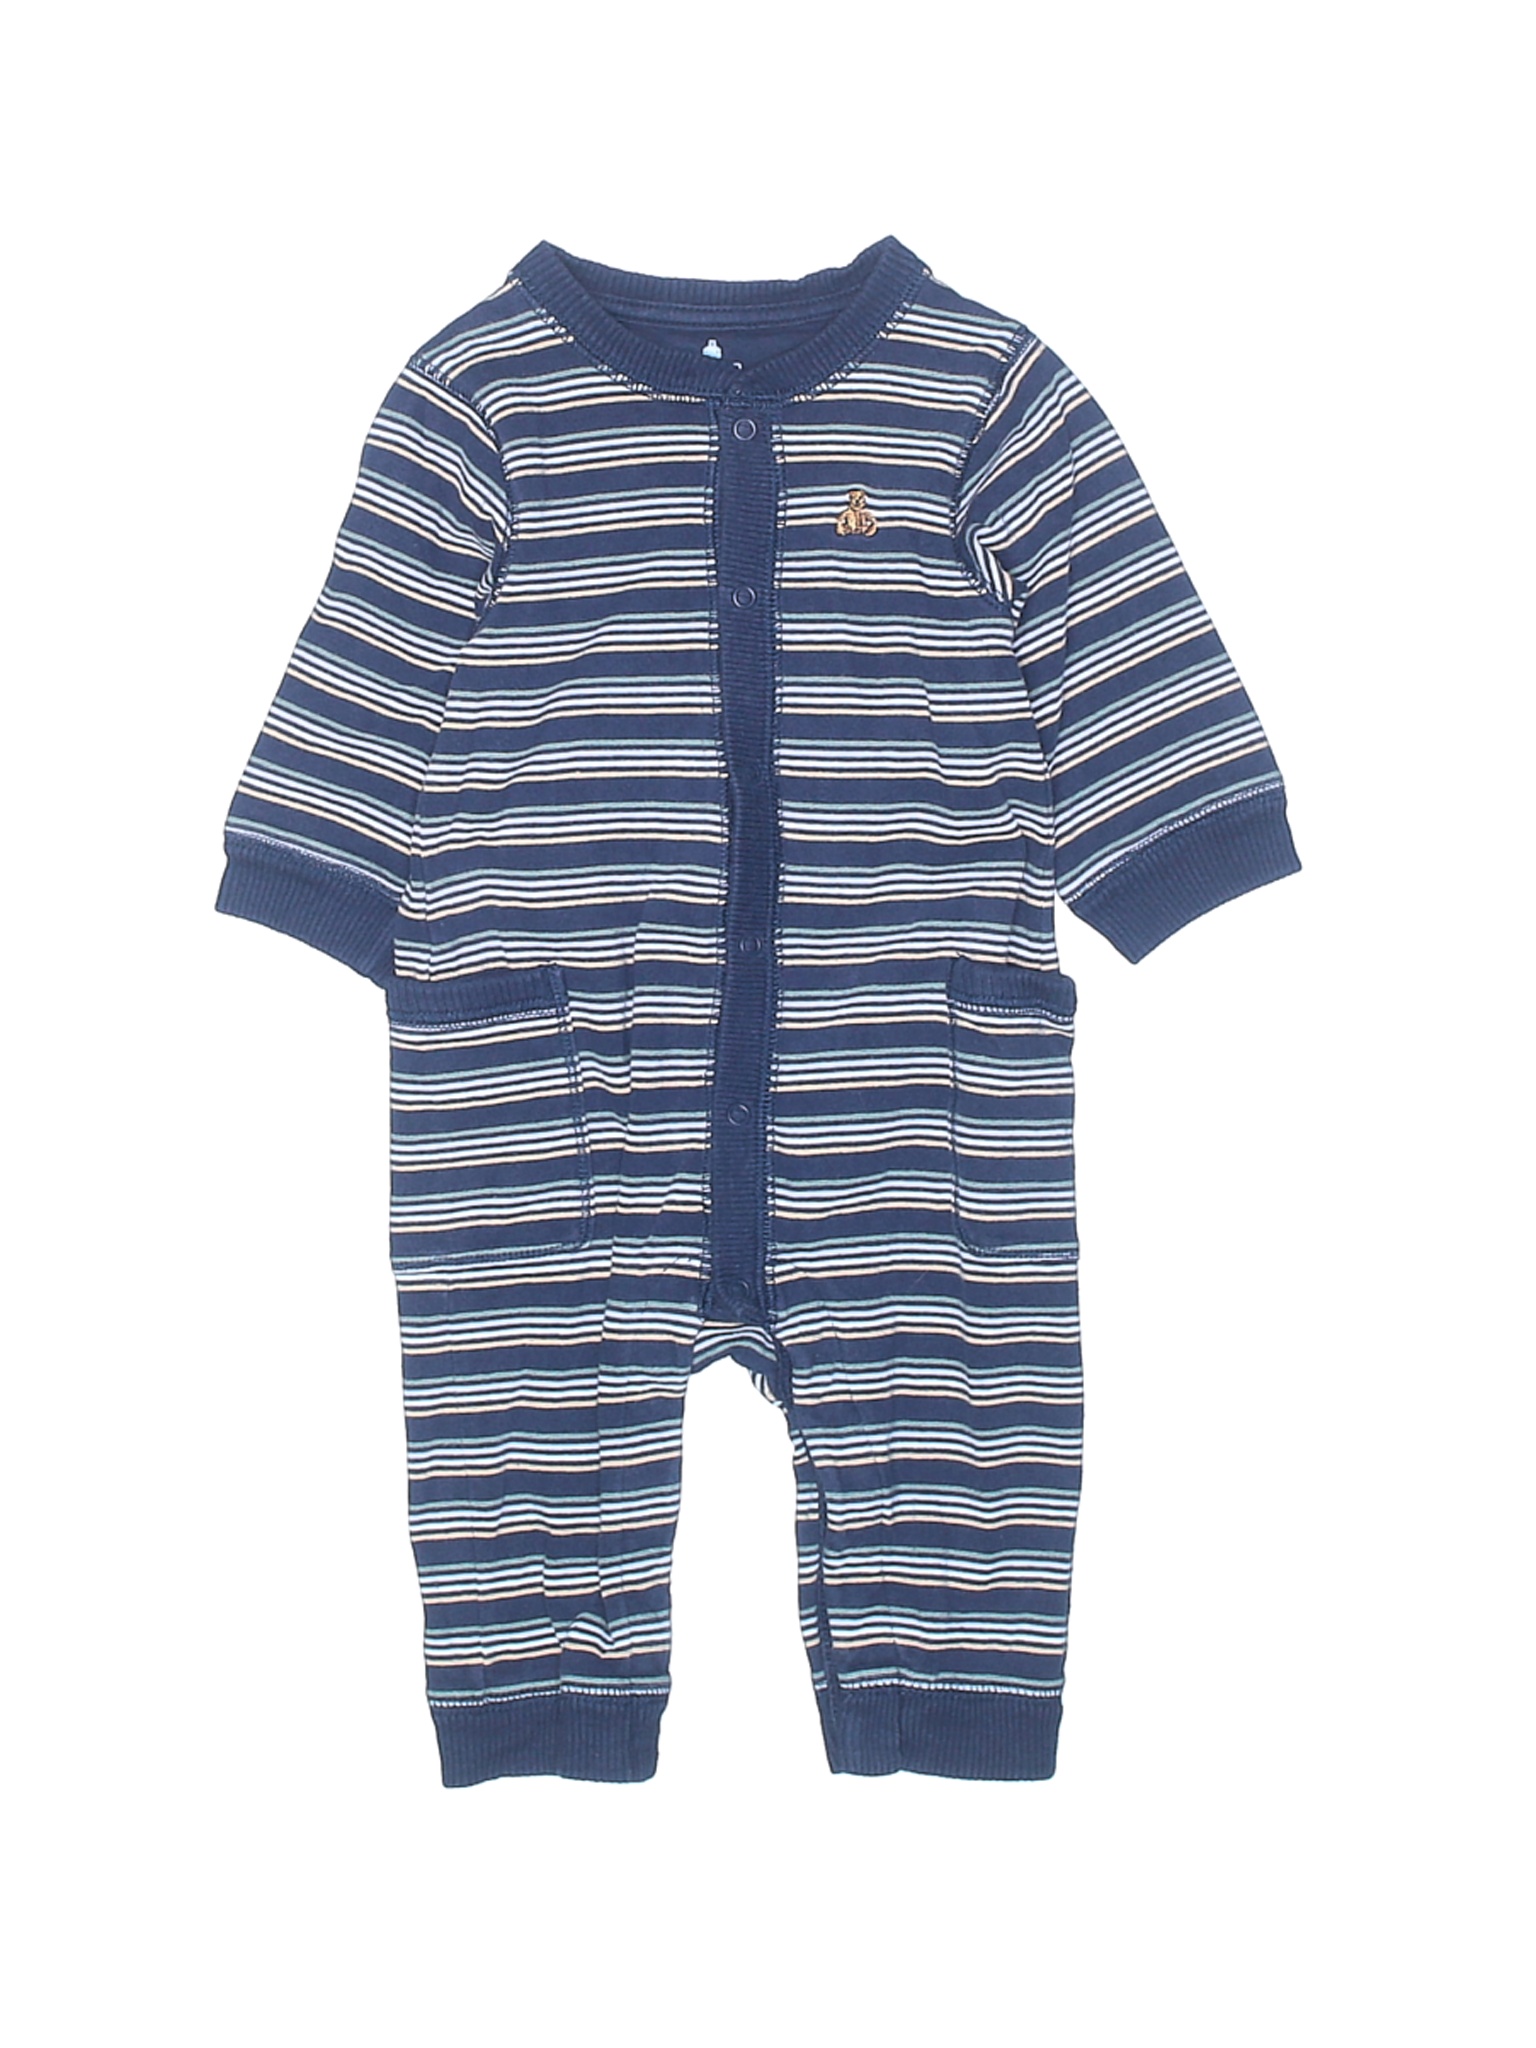 Baby Gap Boys Blue Long Sleeve Outfit 3-6 Months | eBay